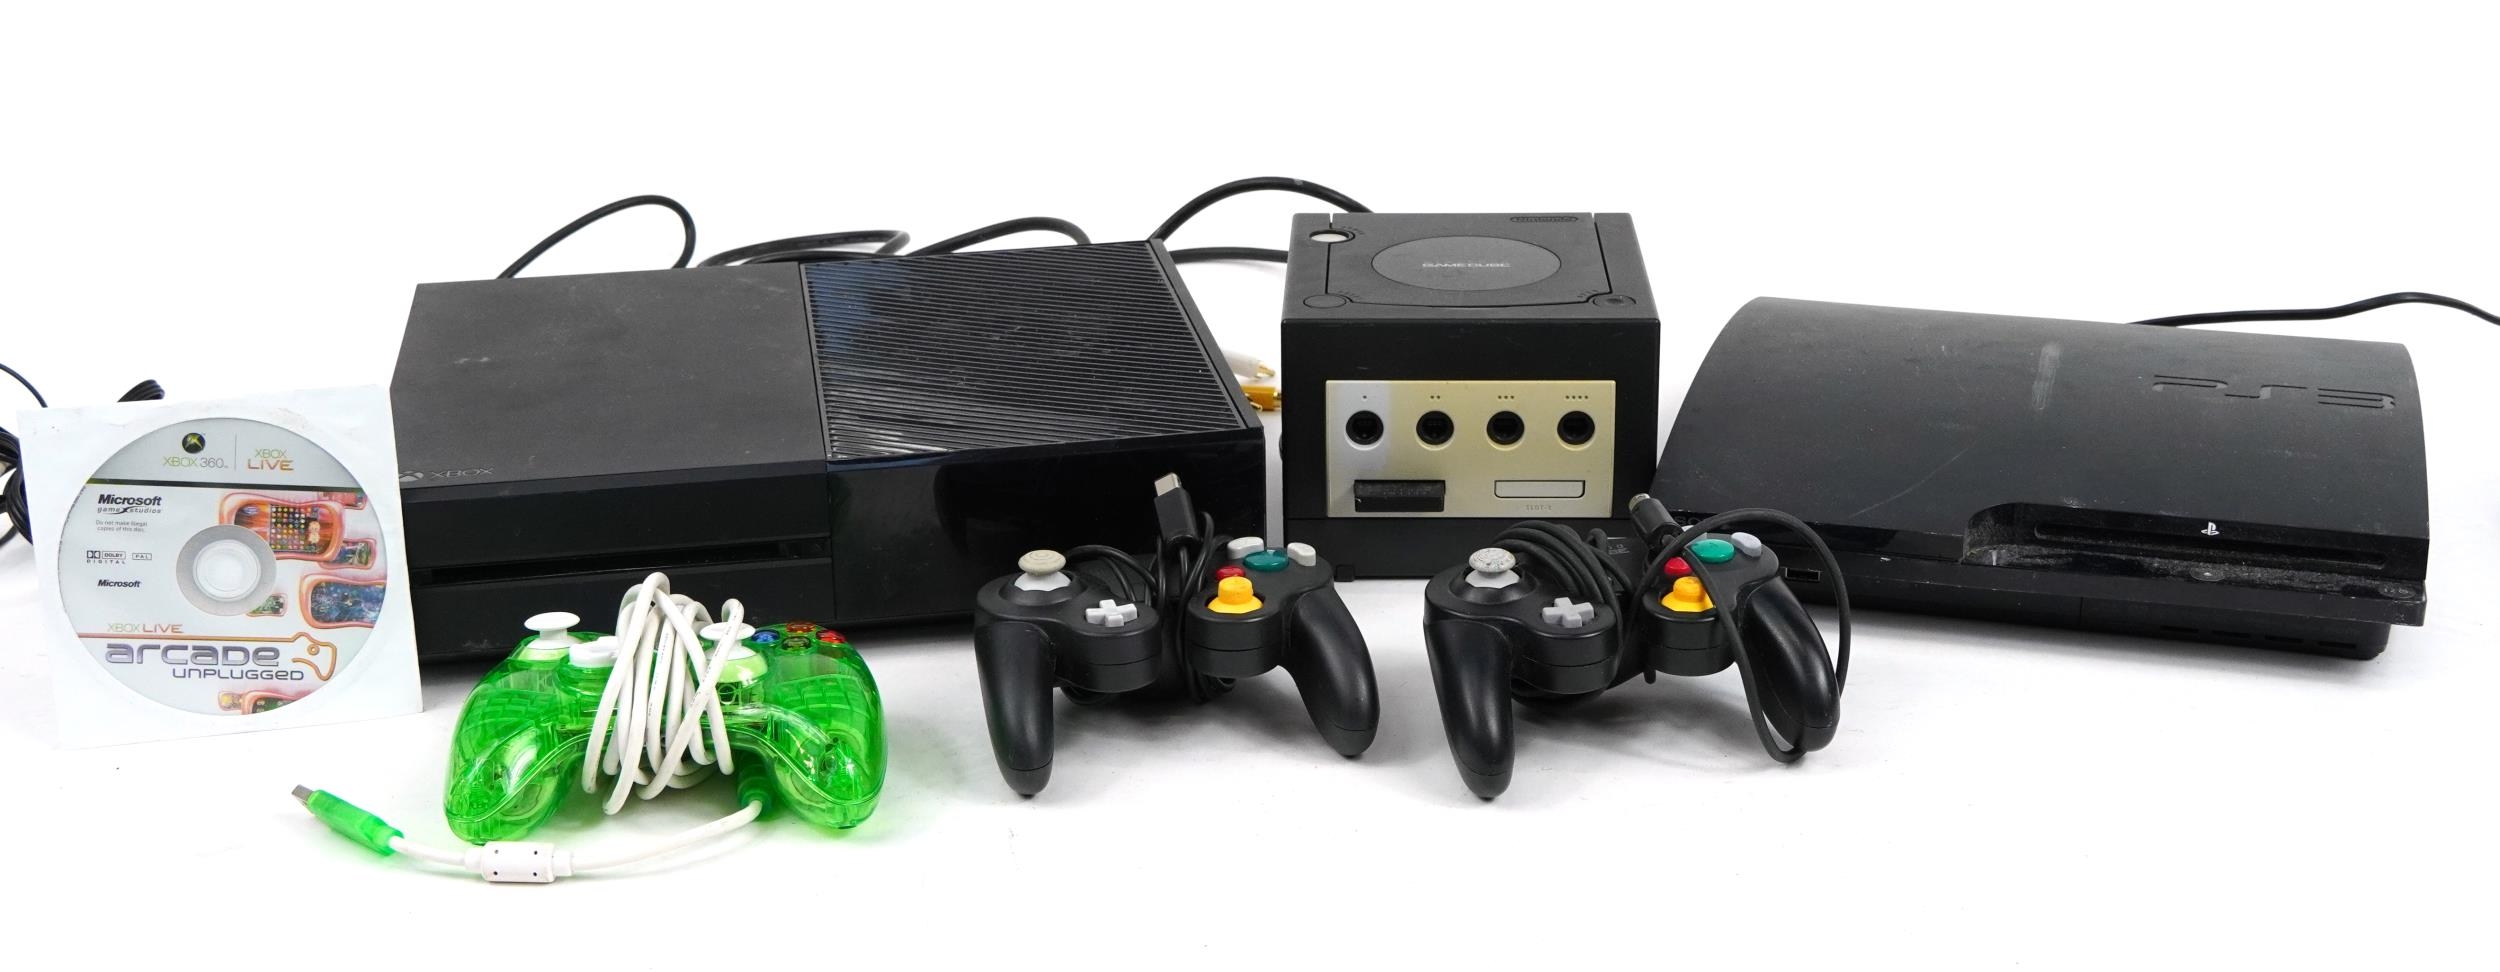 Three games consoles with controllers comprising Play Station 3, Nintendo Gamecube and Xbox